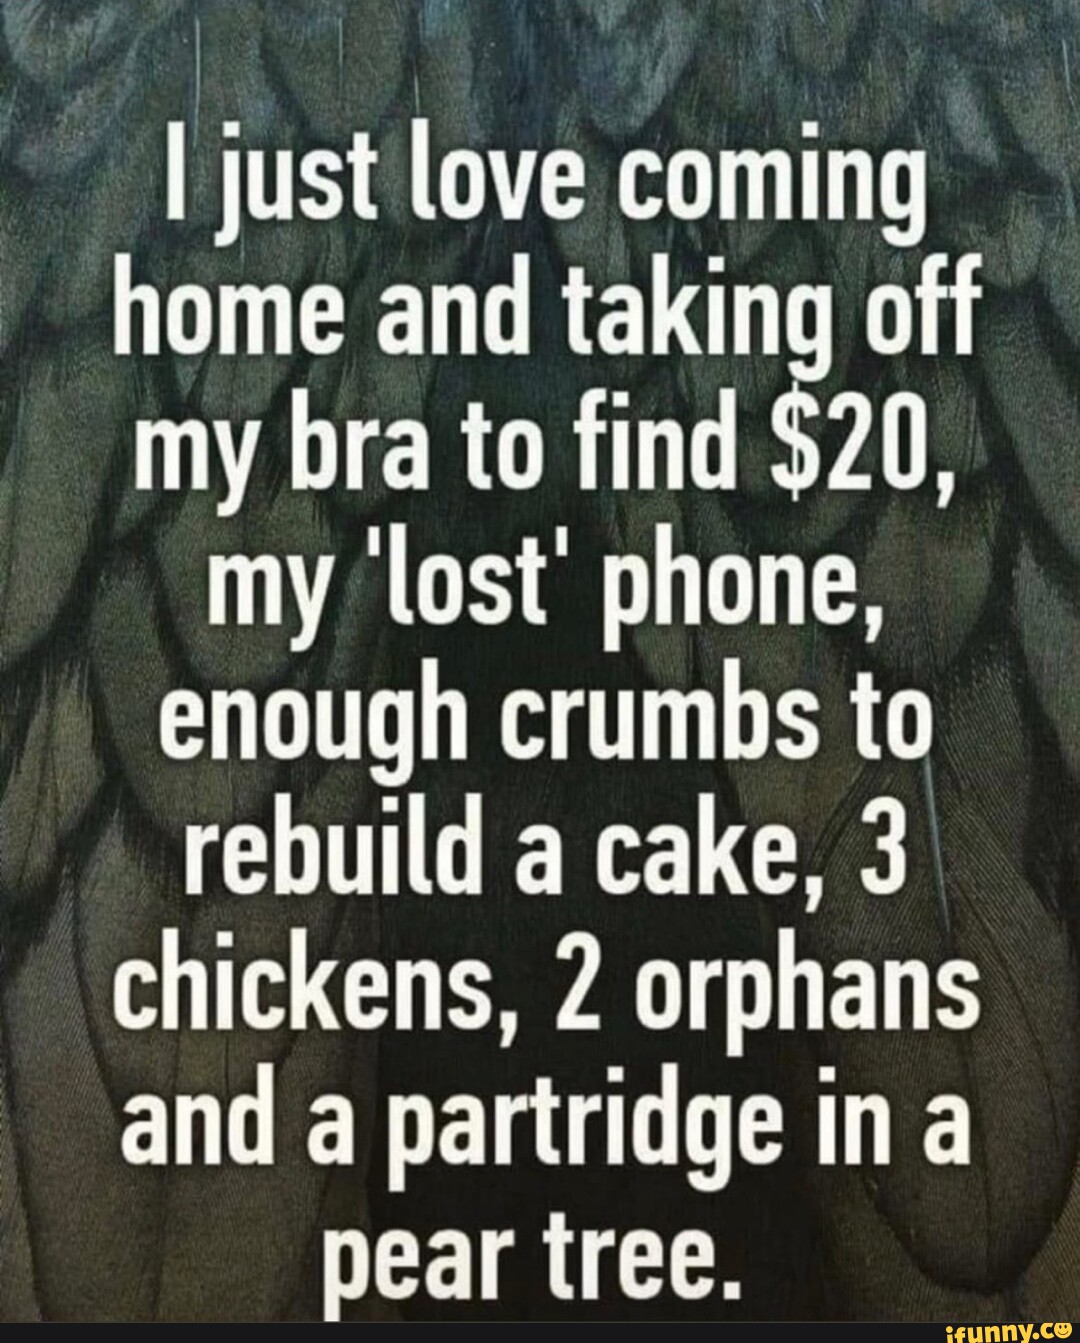 I just love coming home and taking off my bra to find $20, my lost' phone,  enough crumbs to rebuild a cake, 3 chickens, 2 orphans and a partridge ina  pear tree. - iFunny Brazil